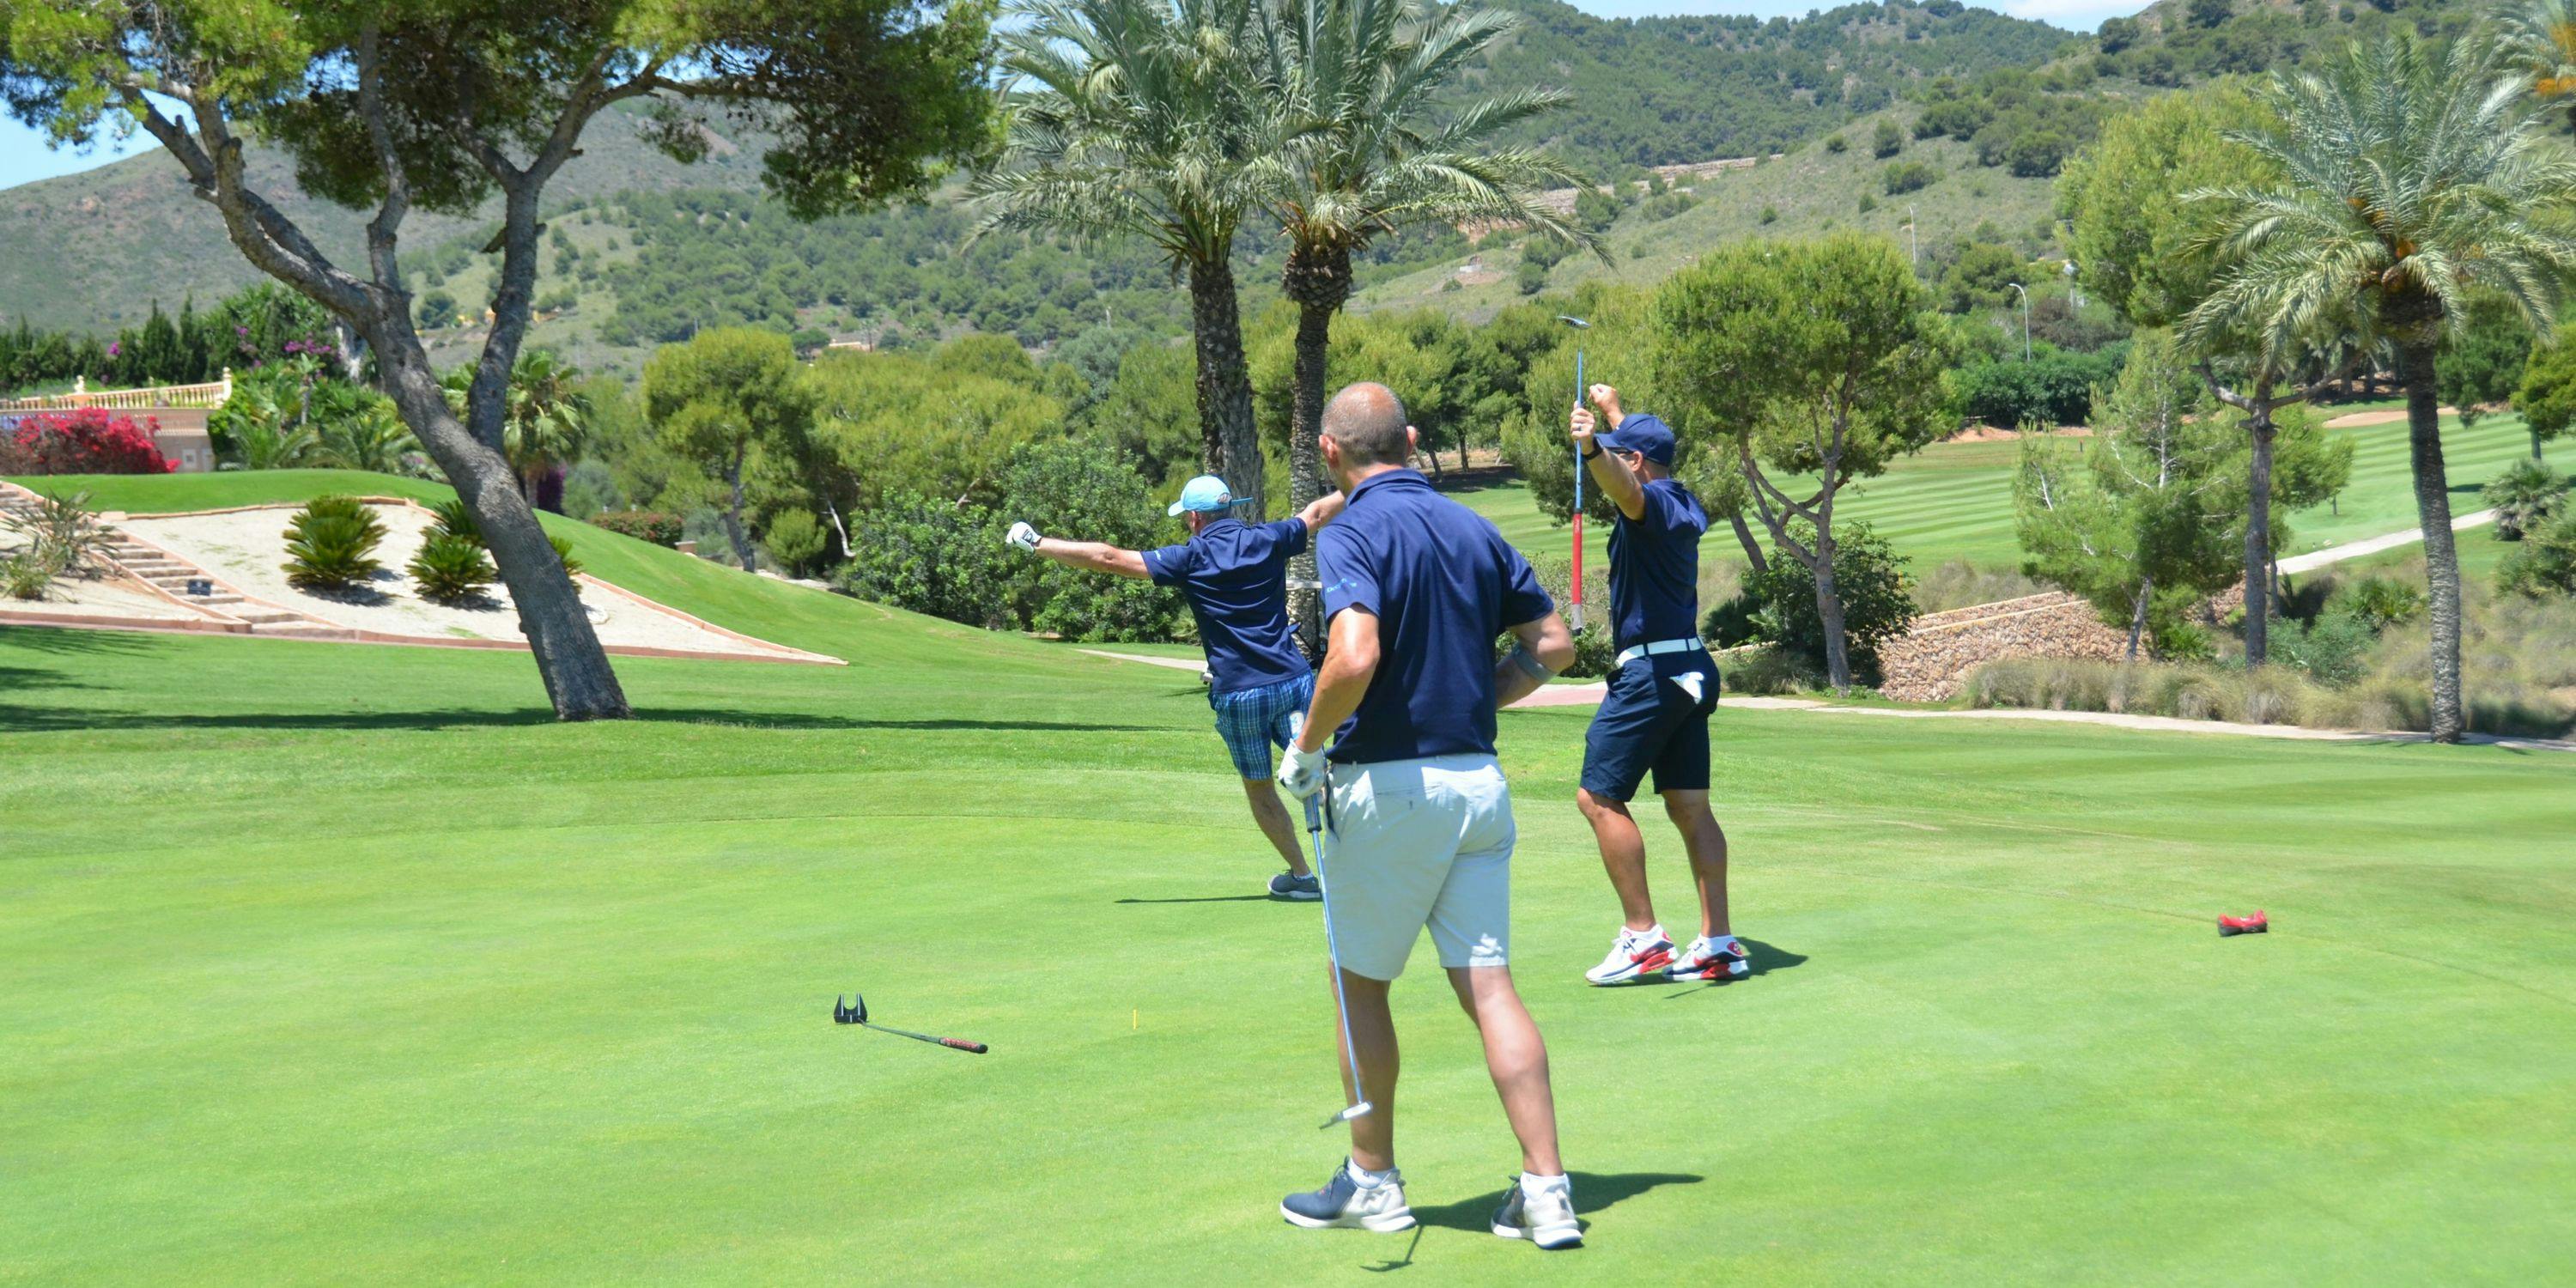 Lawrence Dallaglio at the Wasps Legends Rugby Golf Classic in La Manga in June 2023.